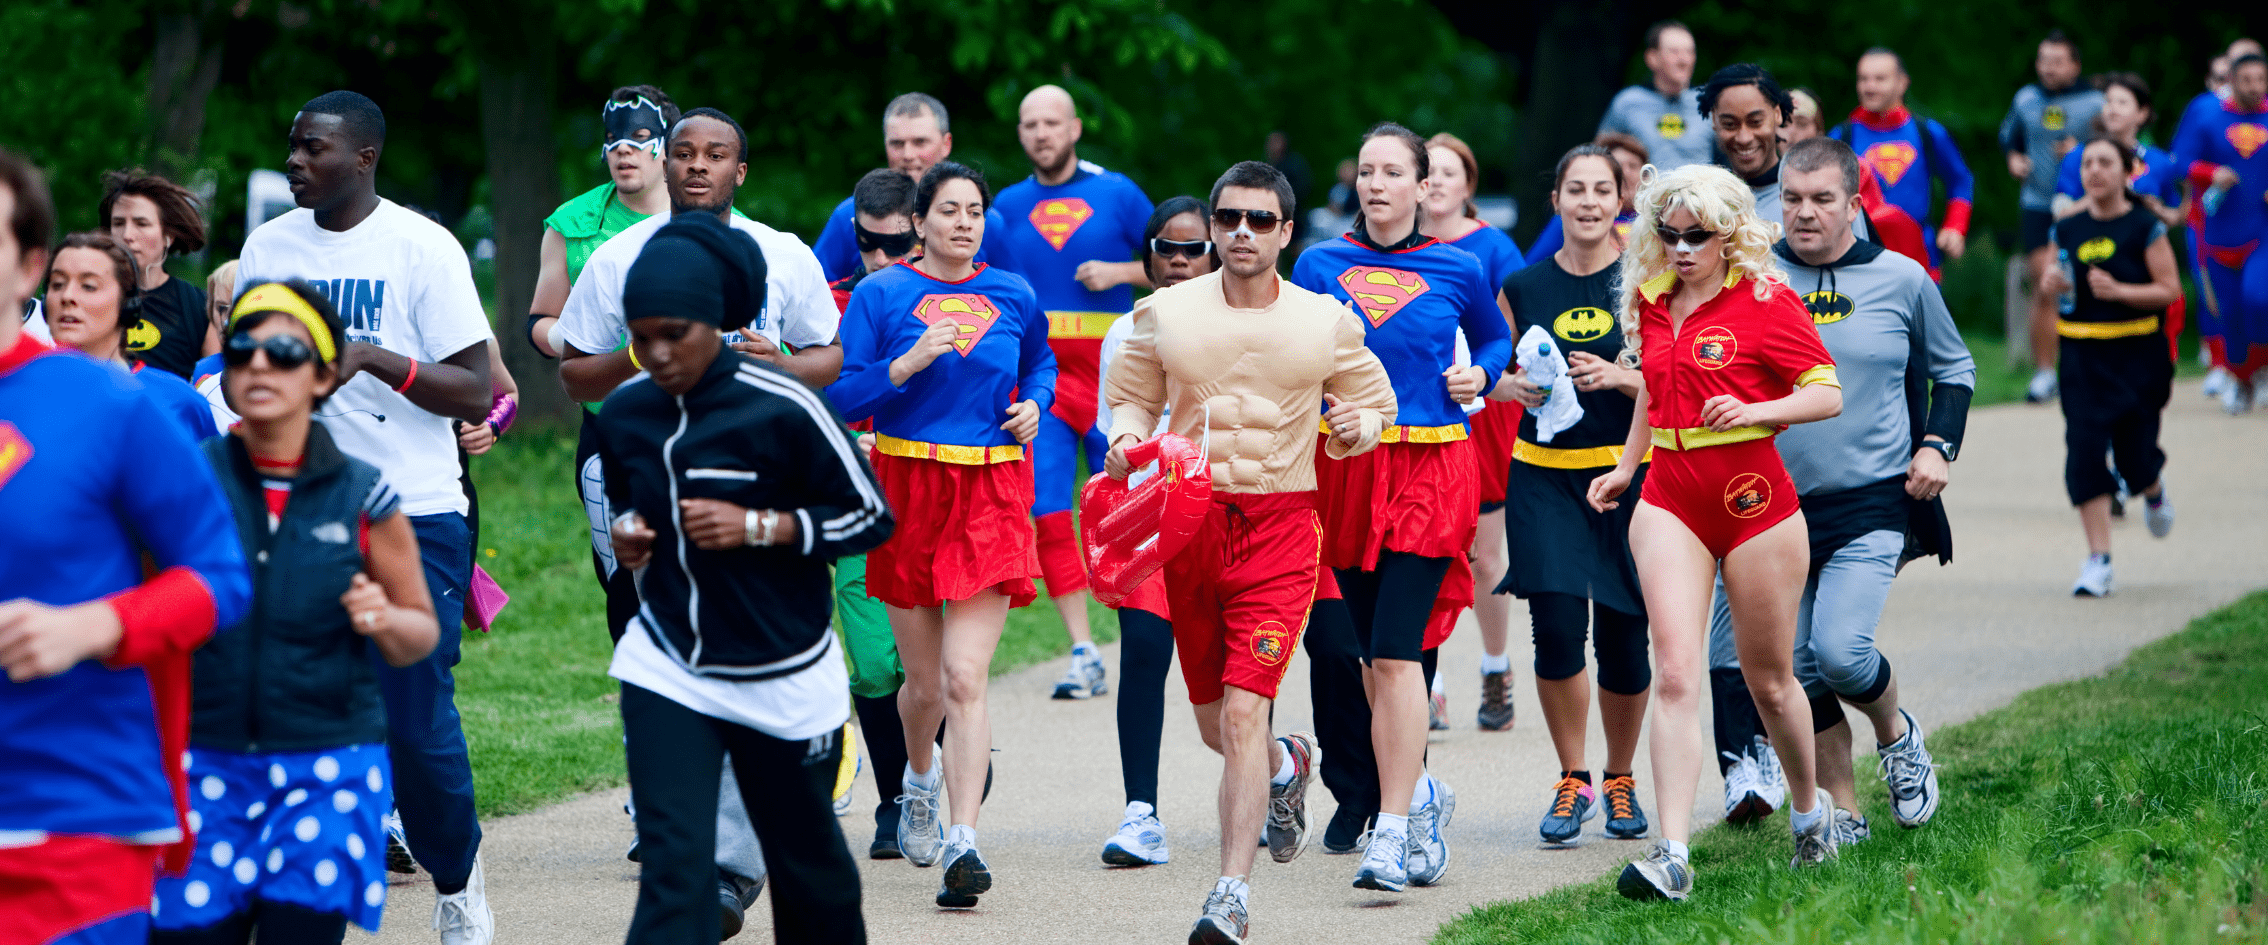 A group of people running at an event in fancy dress